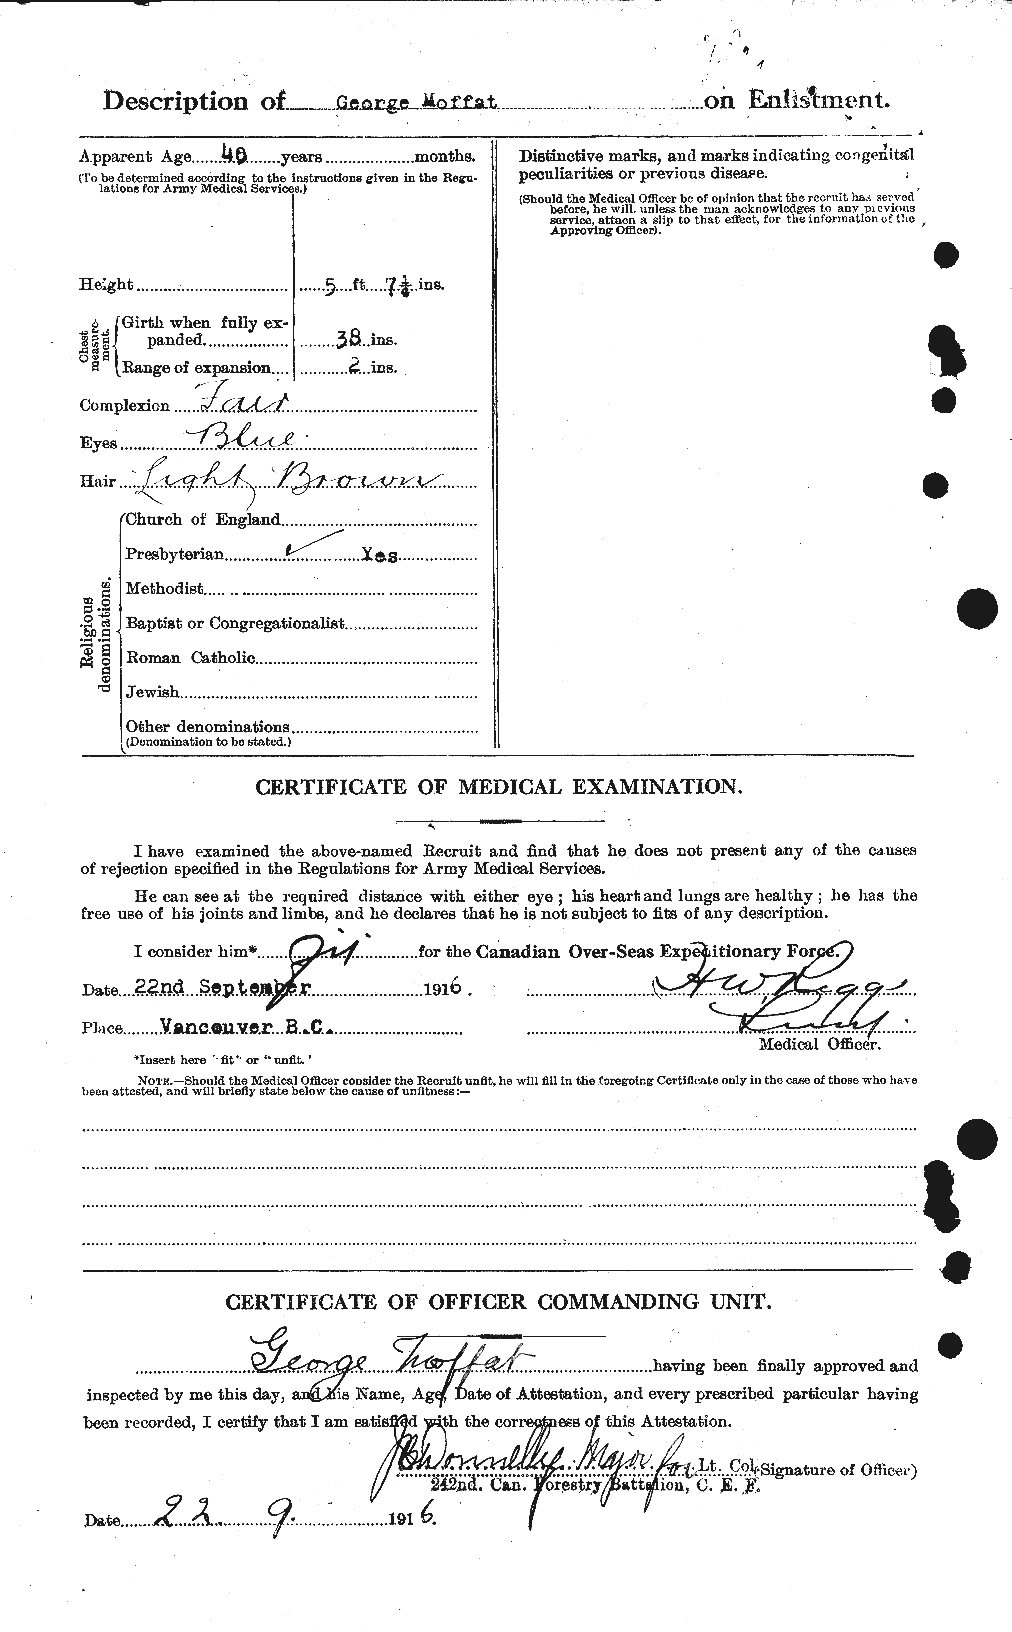 Personnel Records of the First World War - CEF 499013b